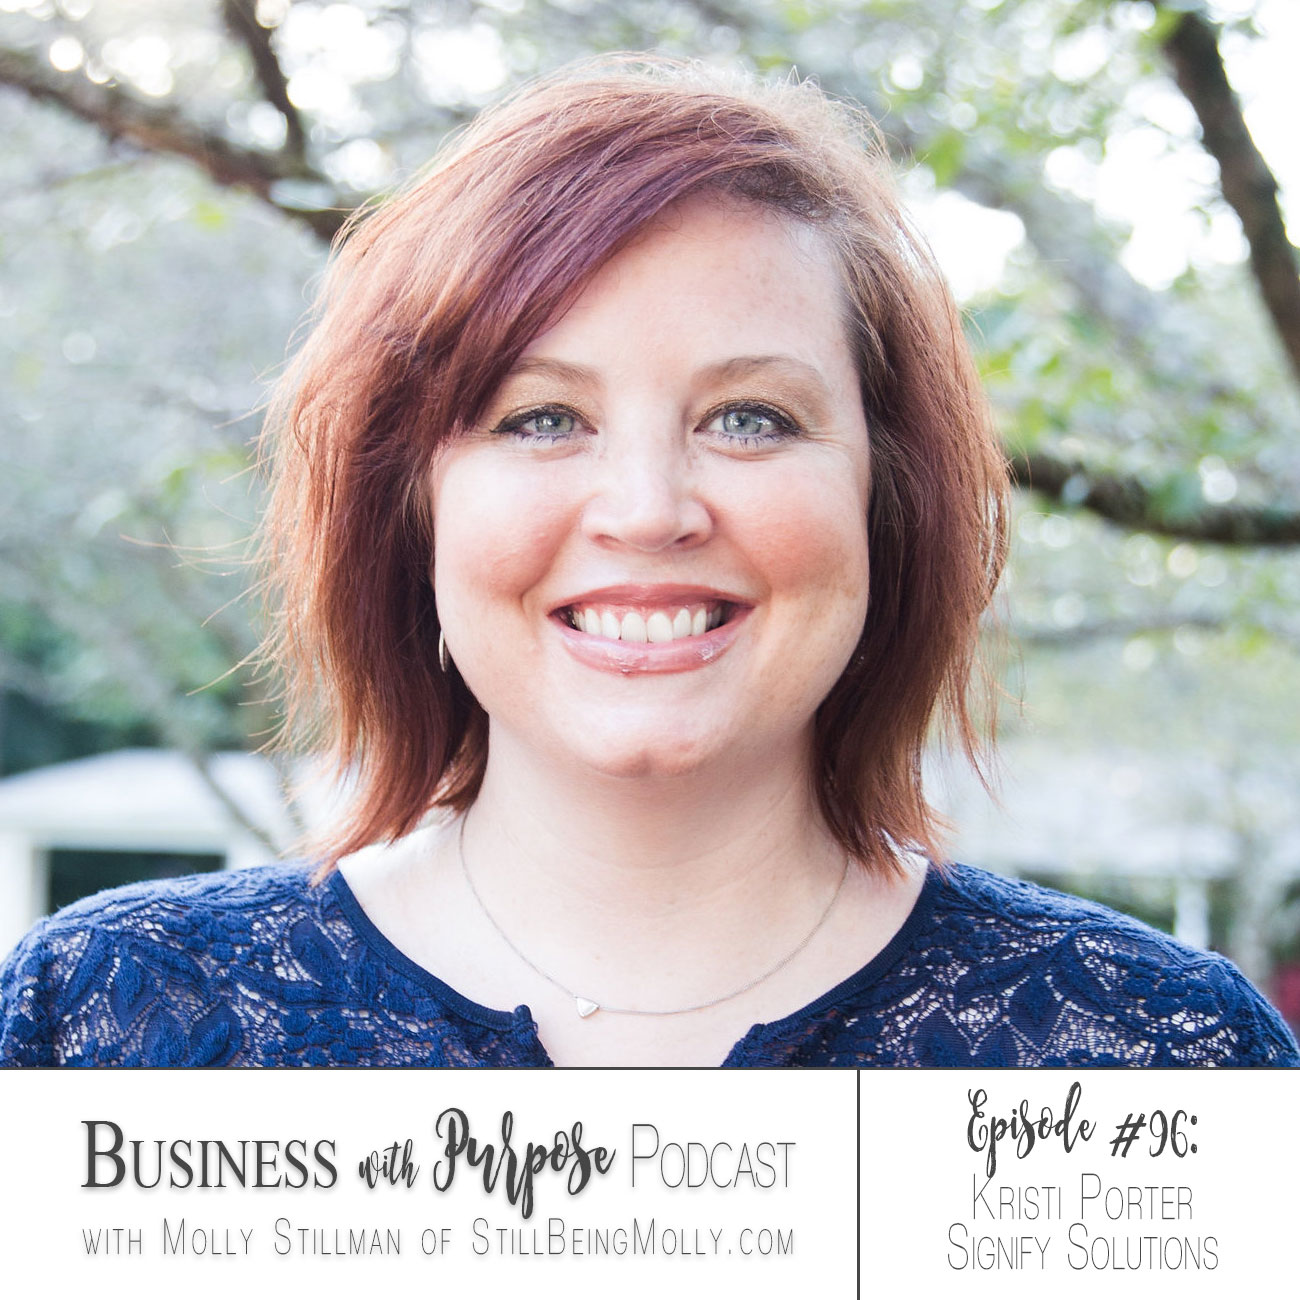 Business with Purpose Podcast EP 96: Kristi Porter, Founder of Signify Solutions